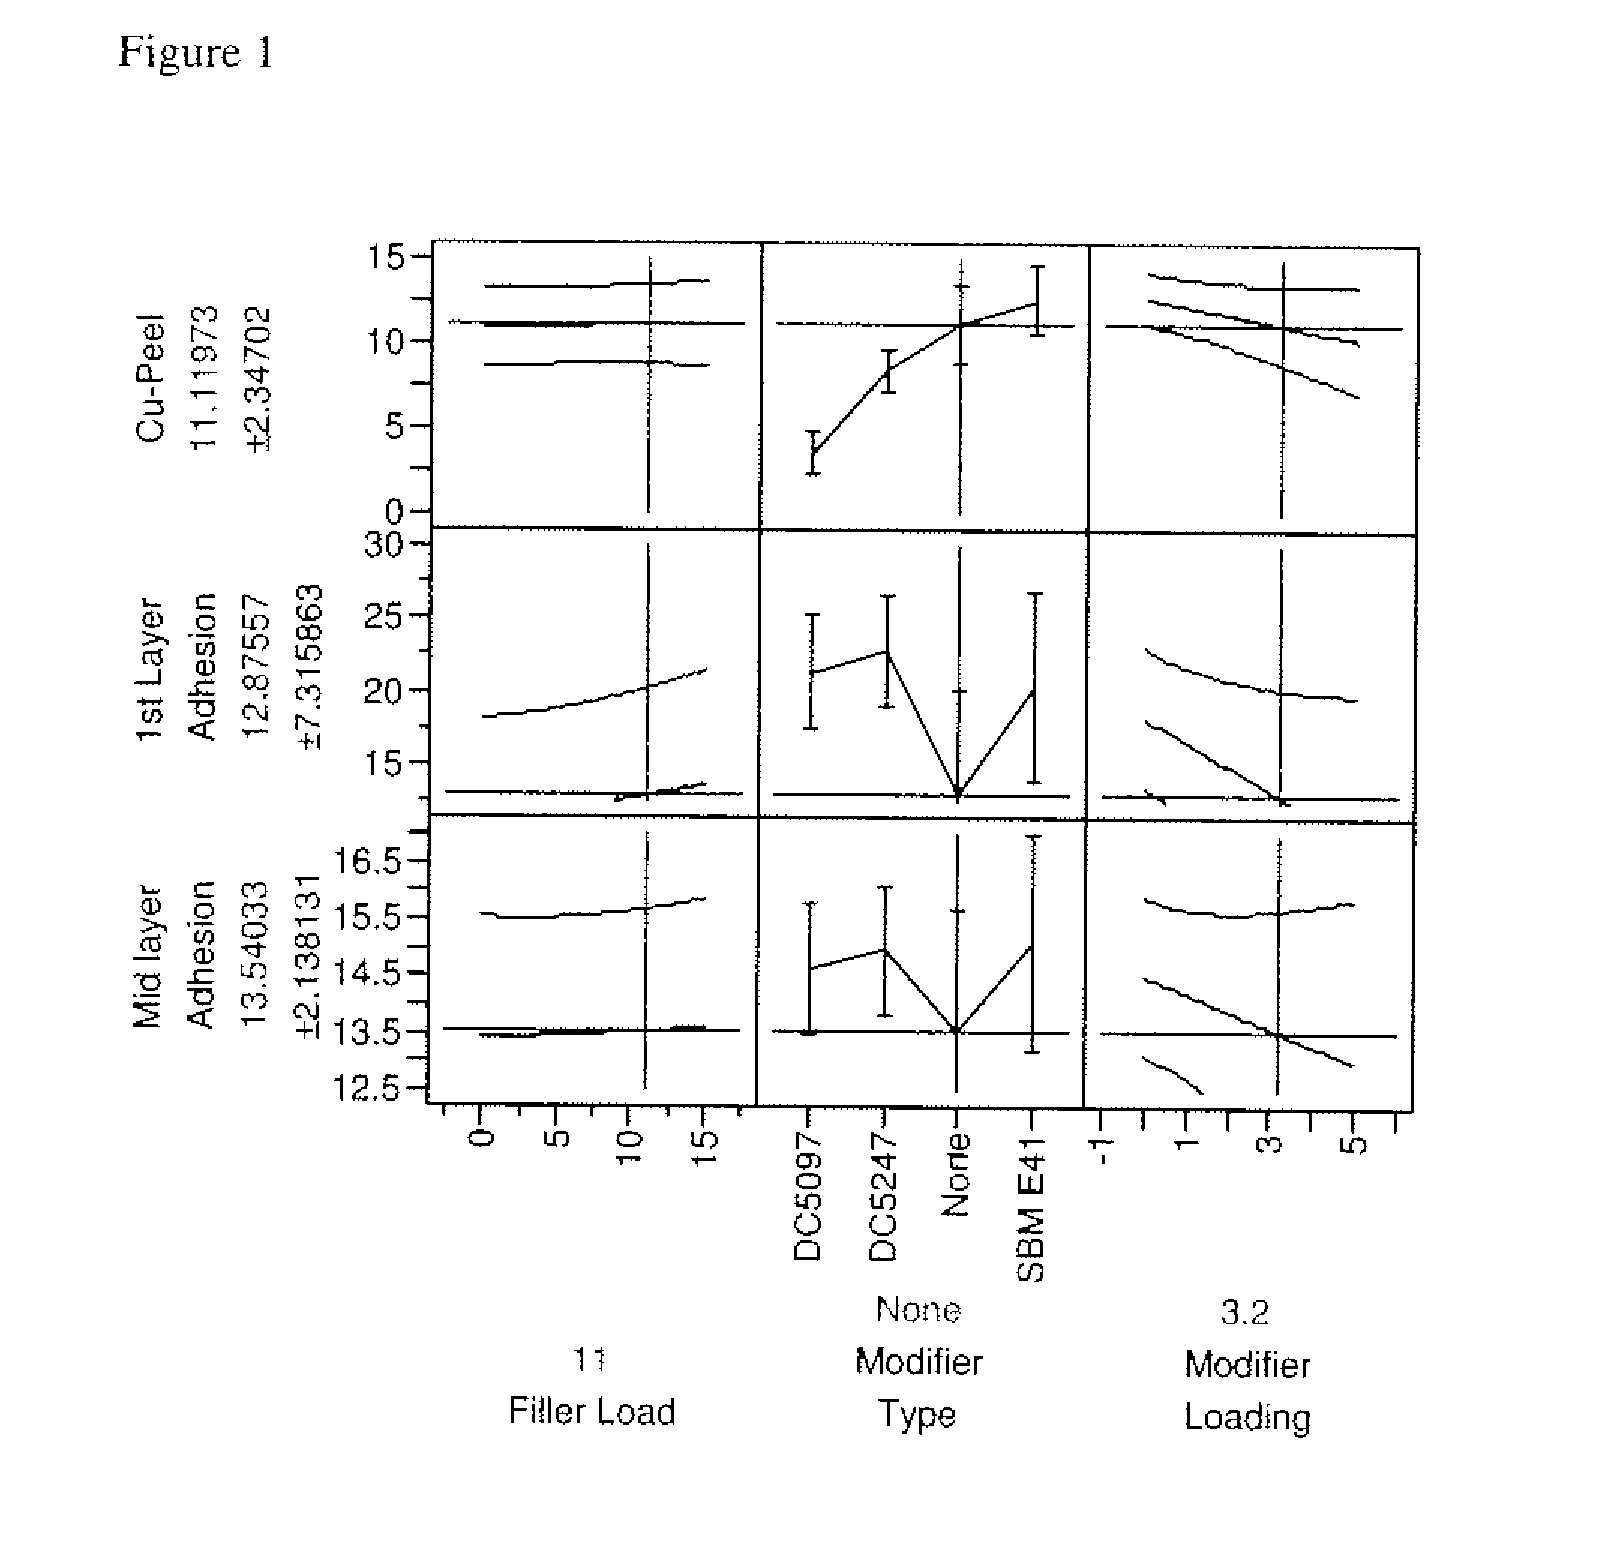 Thermosetting compositions comprising silicone polyethers, their manufacture, and uses